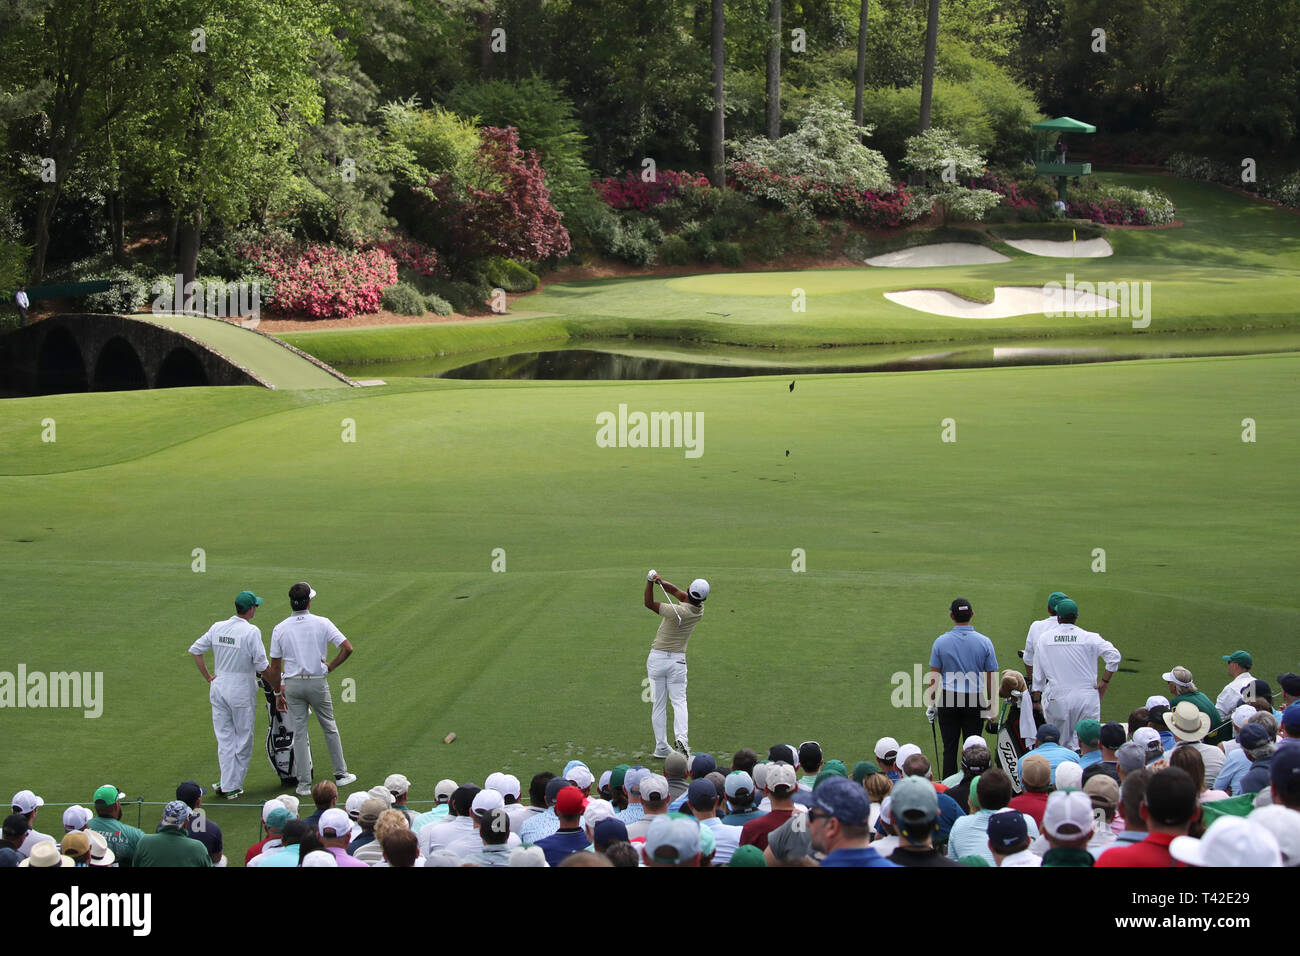 Japans Satoshi Kodaira hits his tee shot on the 12th hole during the first round of the 2019 Masters golf tournament at the Augusta National Golf Club in Augusta, Georgia, United States